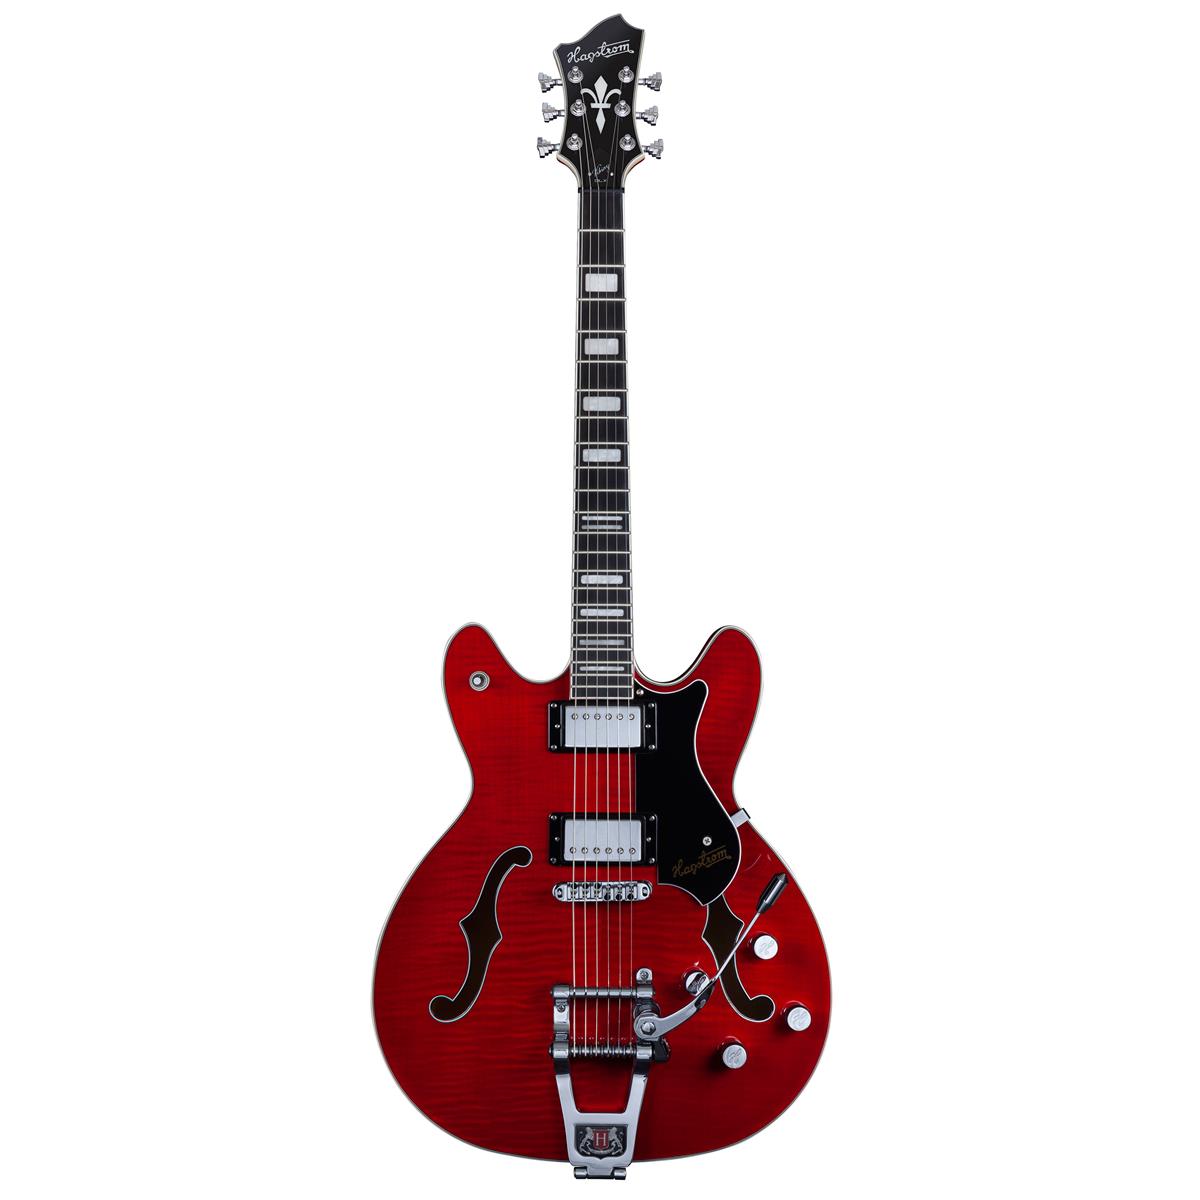 Hagstrom Tremar Viking Deluxe Electric Guitar, Wild Cherry Transparent -  TREVIDLX-WCT